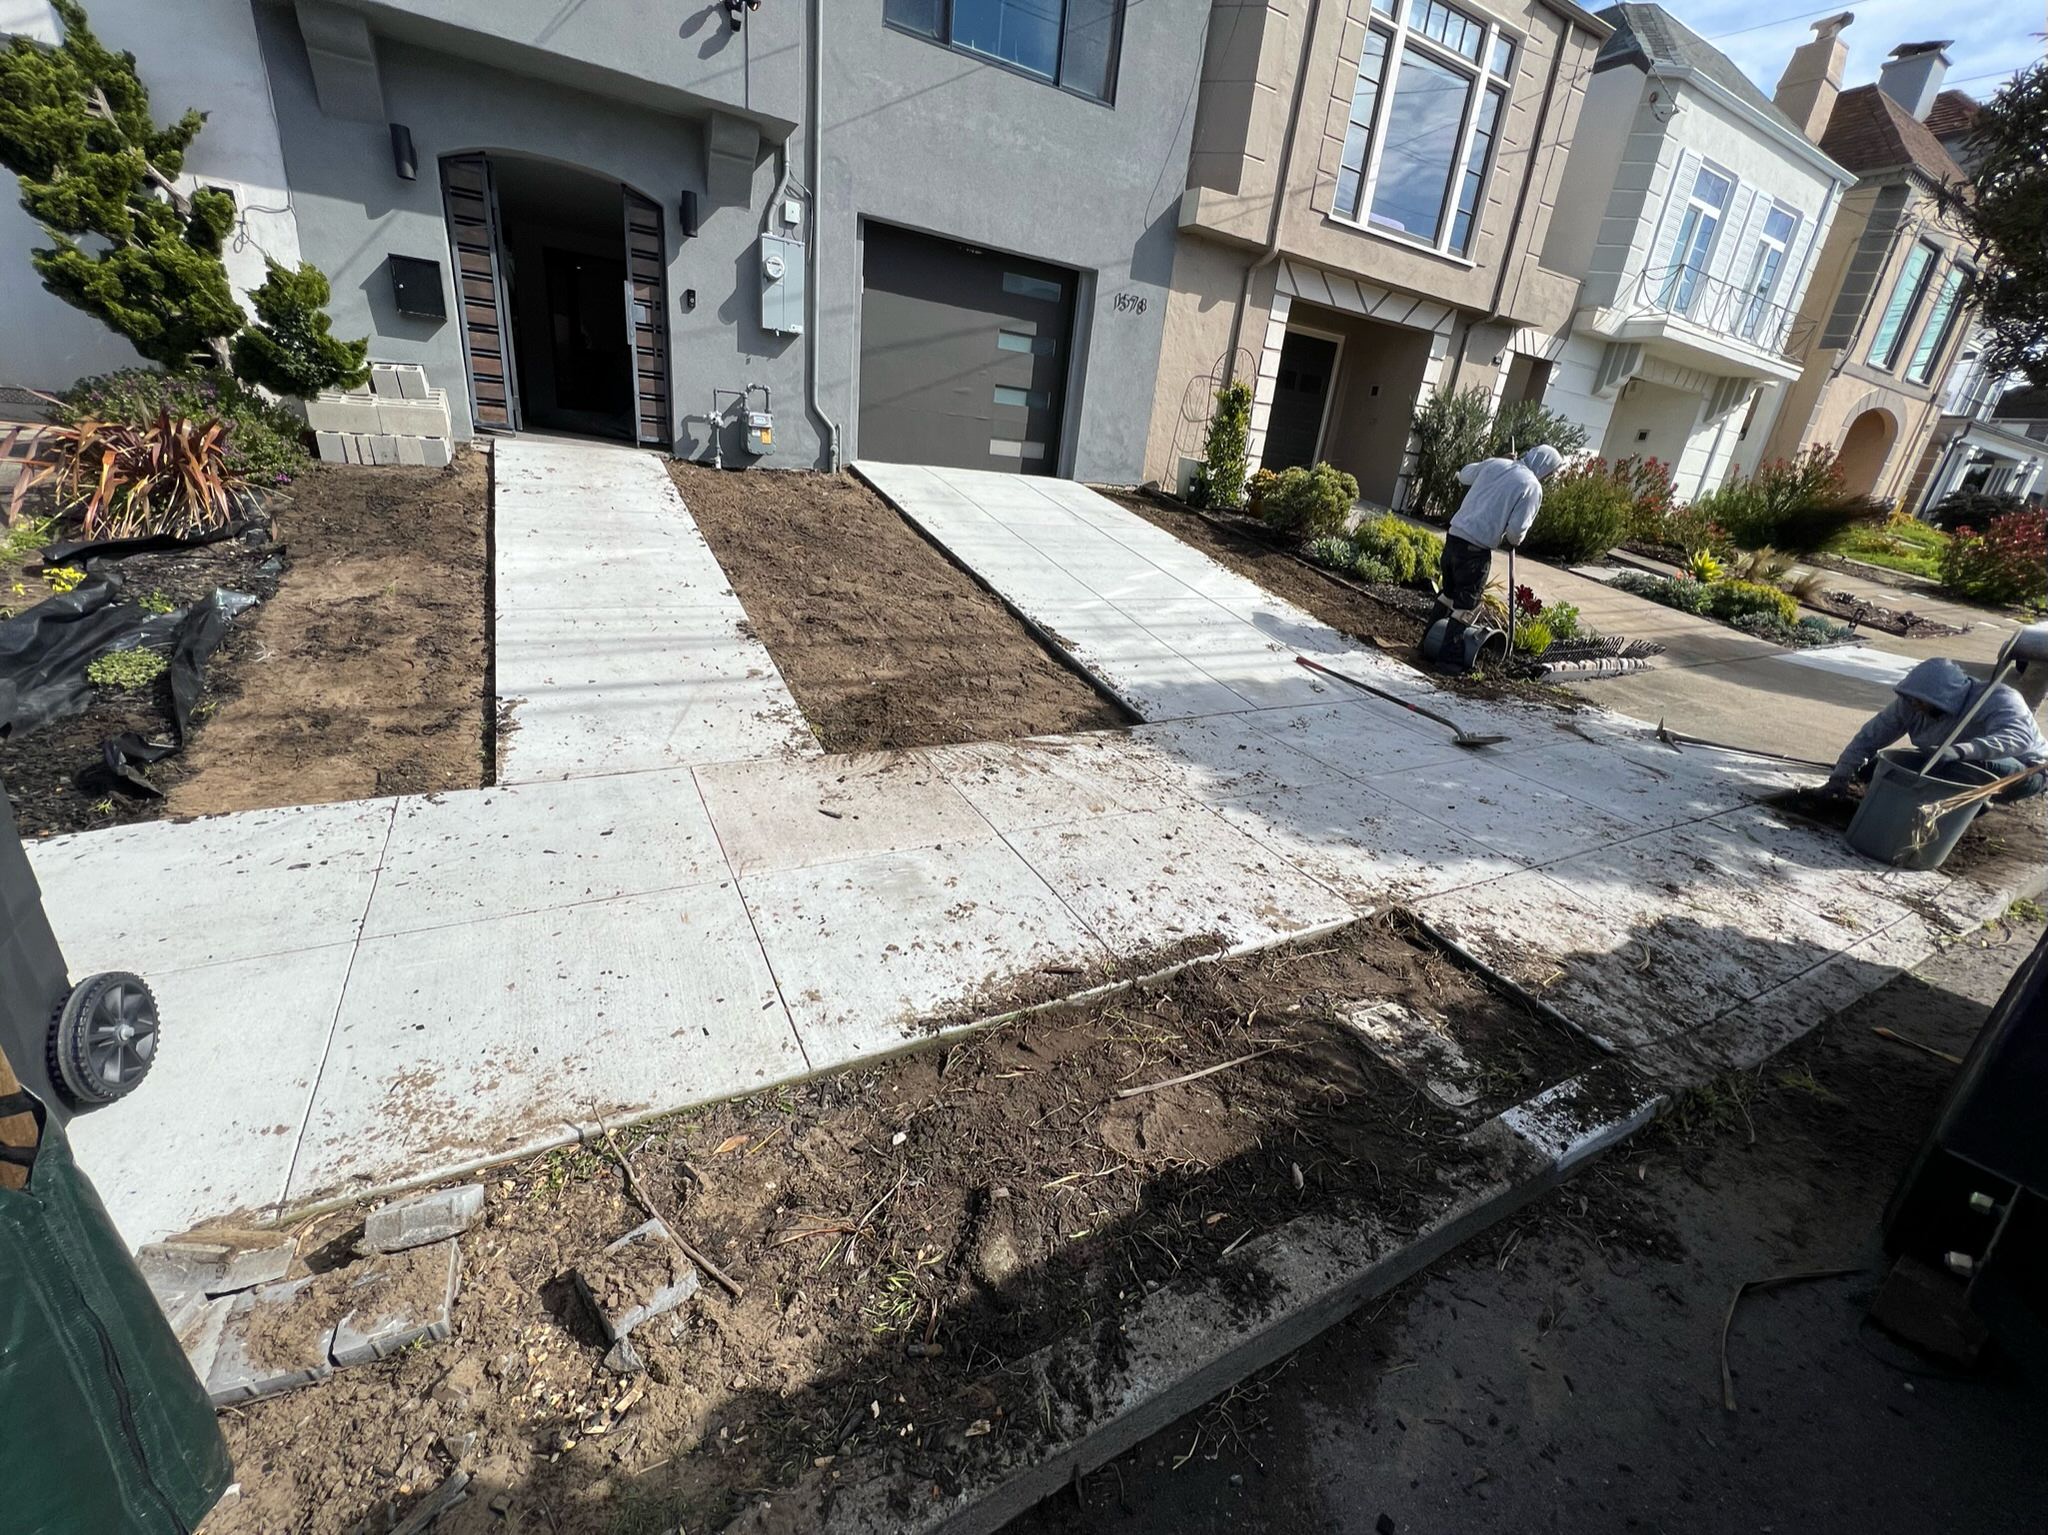 Front yard before at Outer Sunset, San Francisco project. Concrete walkway surrounded by two dirt areas on sides. Walkway in front of house with dirt area in front of walkway.